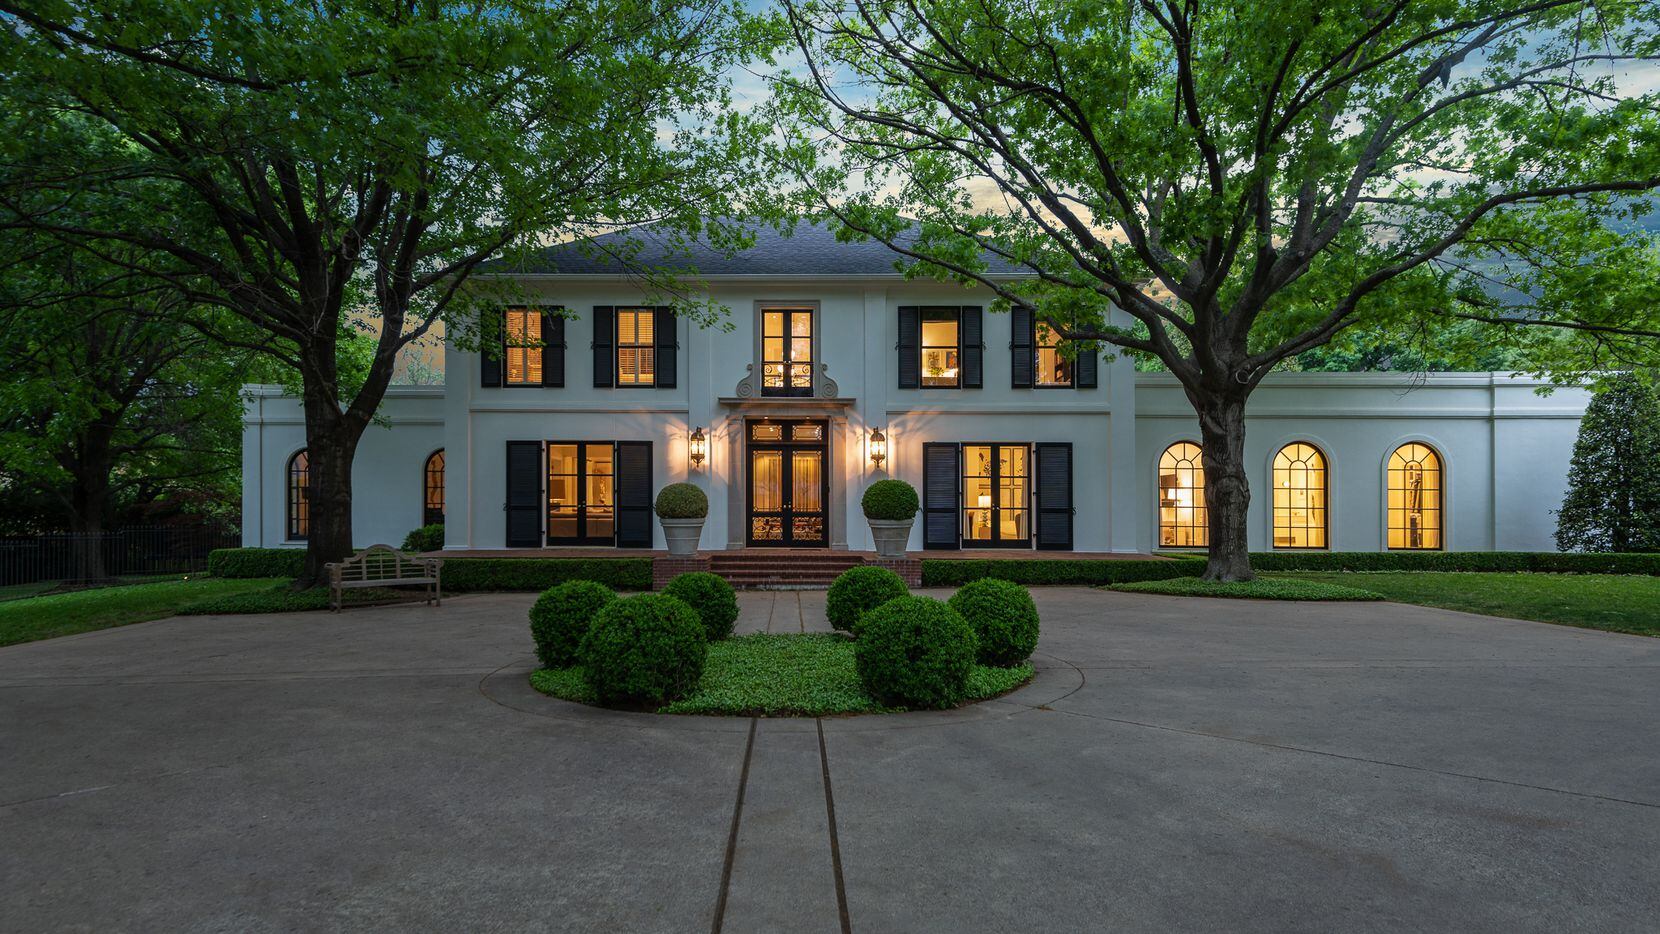 Take a look at the home at 6210 Raintree Court in Dallas.